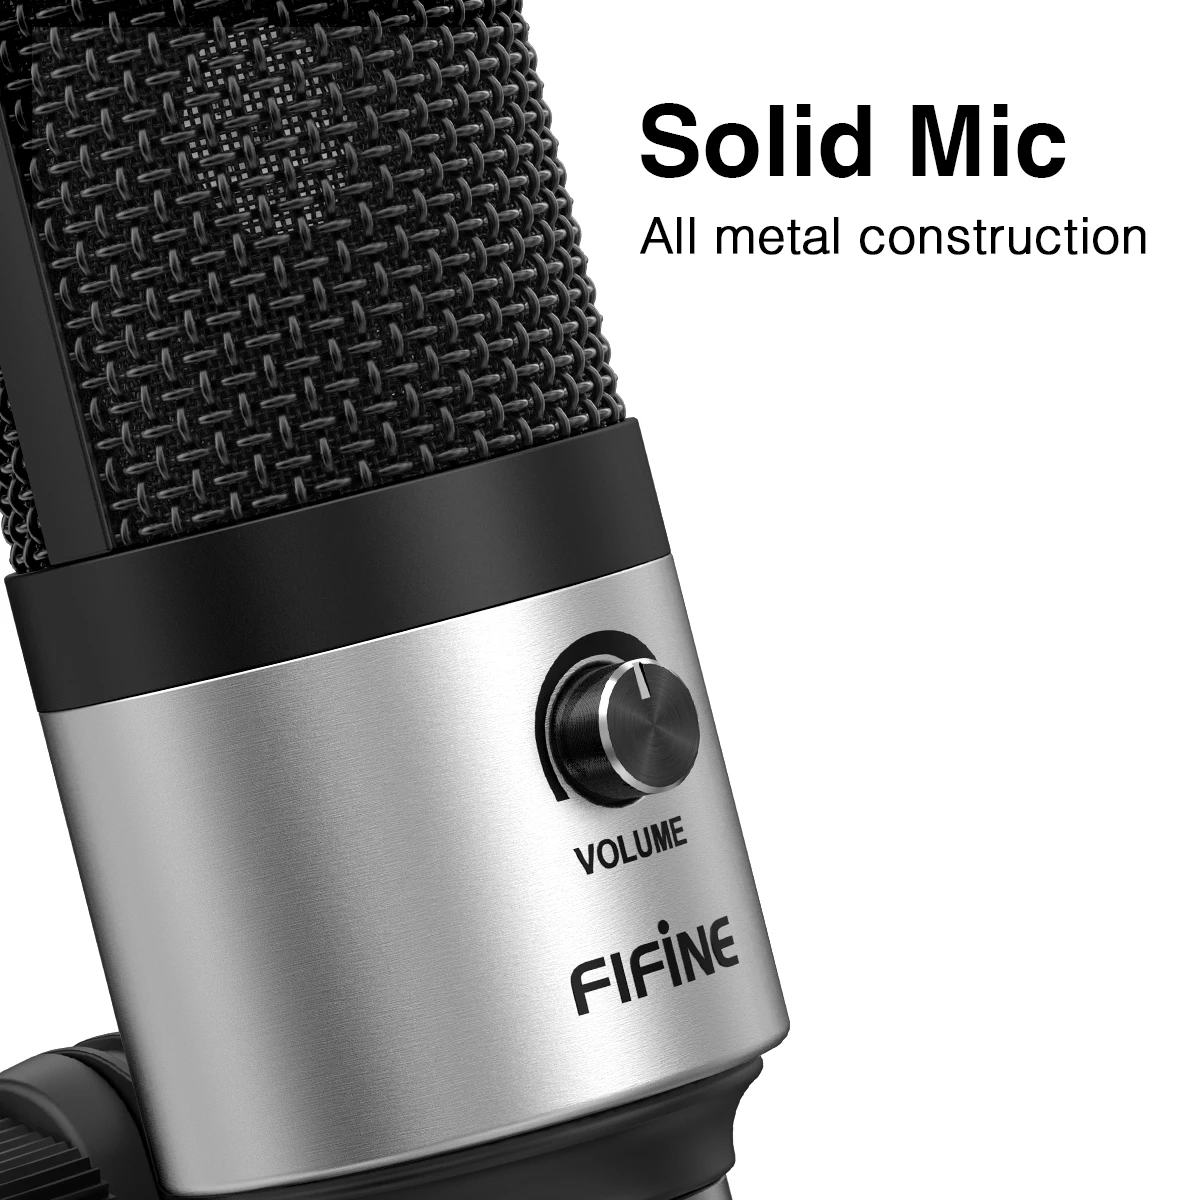 FIFINE Metal Computer Microphone USB MIC kit with Volume Knob for